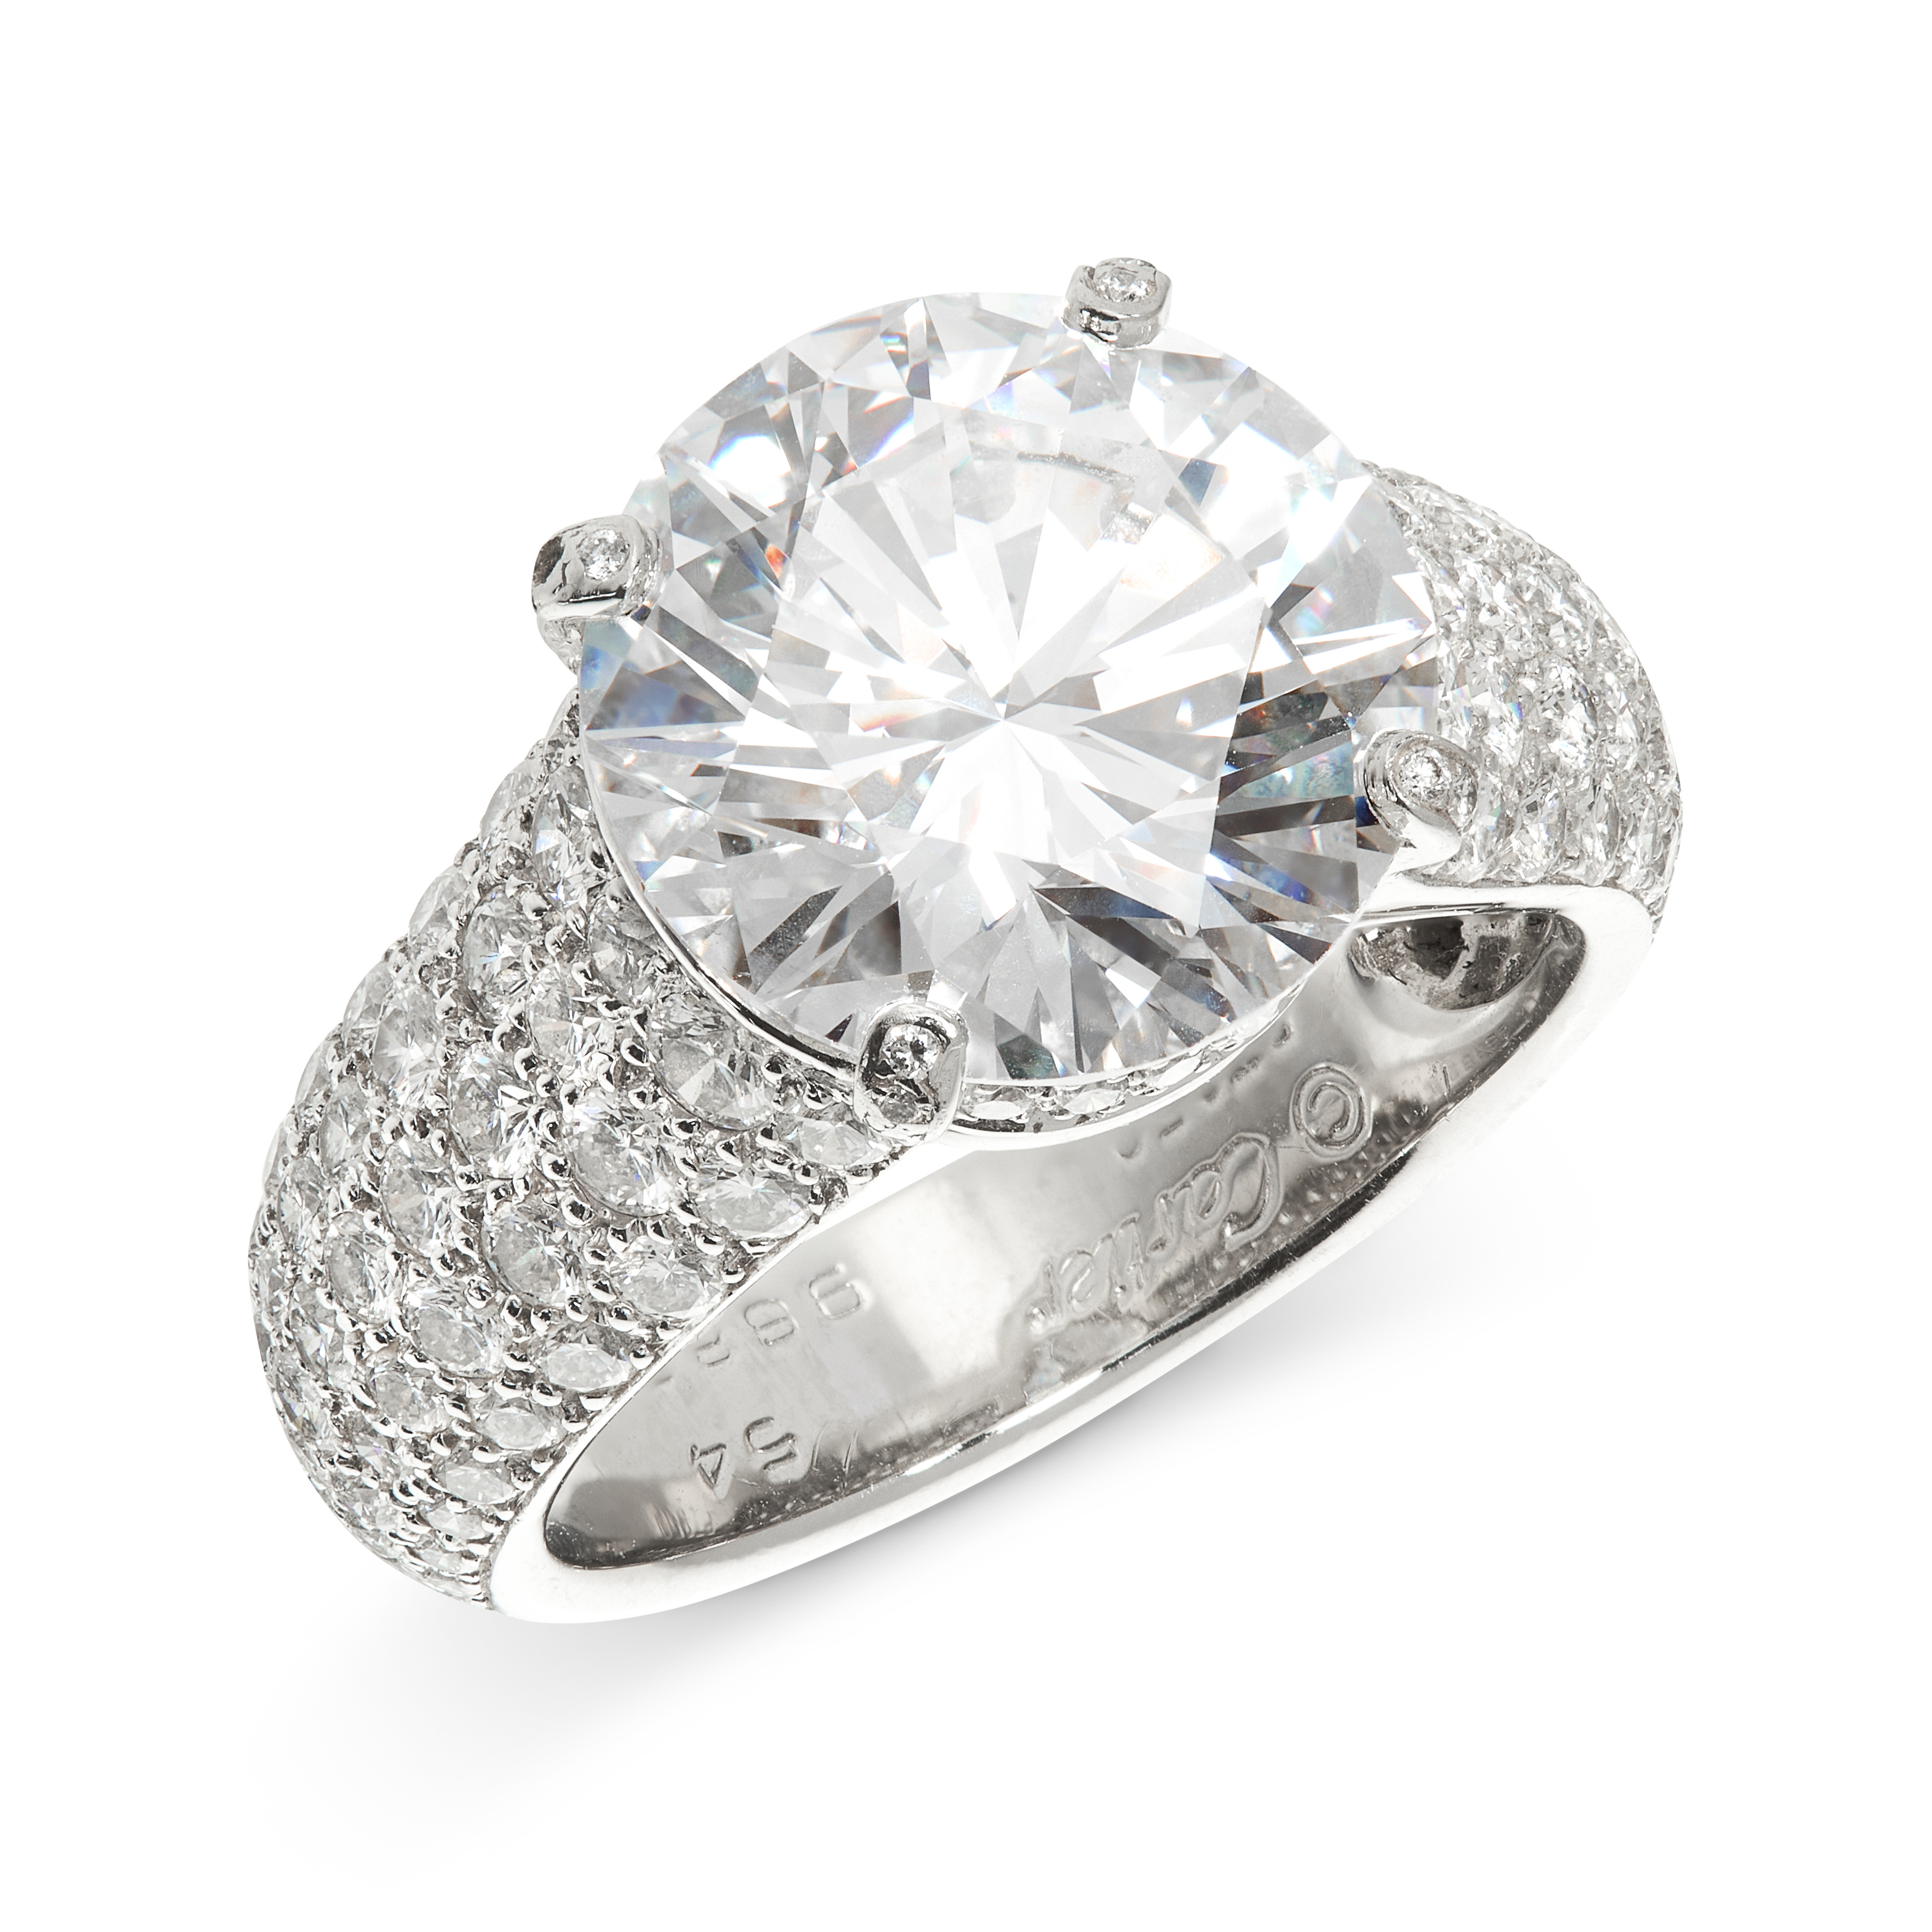 AN IMPORTANT 6.36 CARAT SOLITAIRE DIAMOND RING, CARTIER in platinum, set with a round cut diamond of - Image 2 of 2